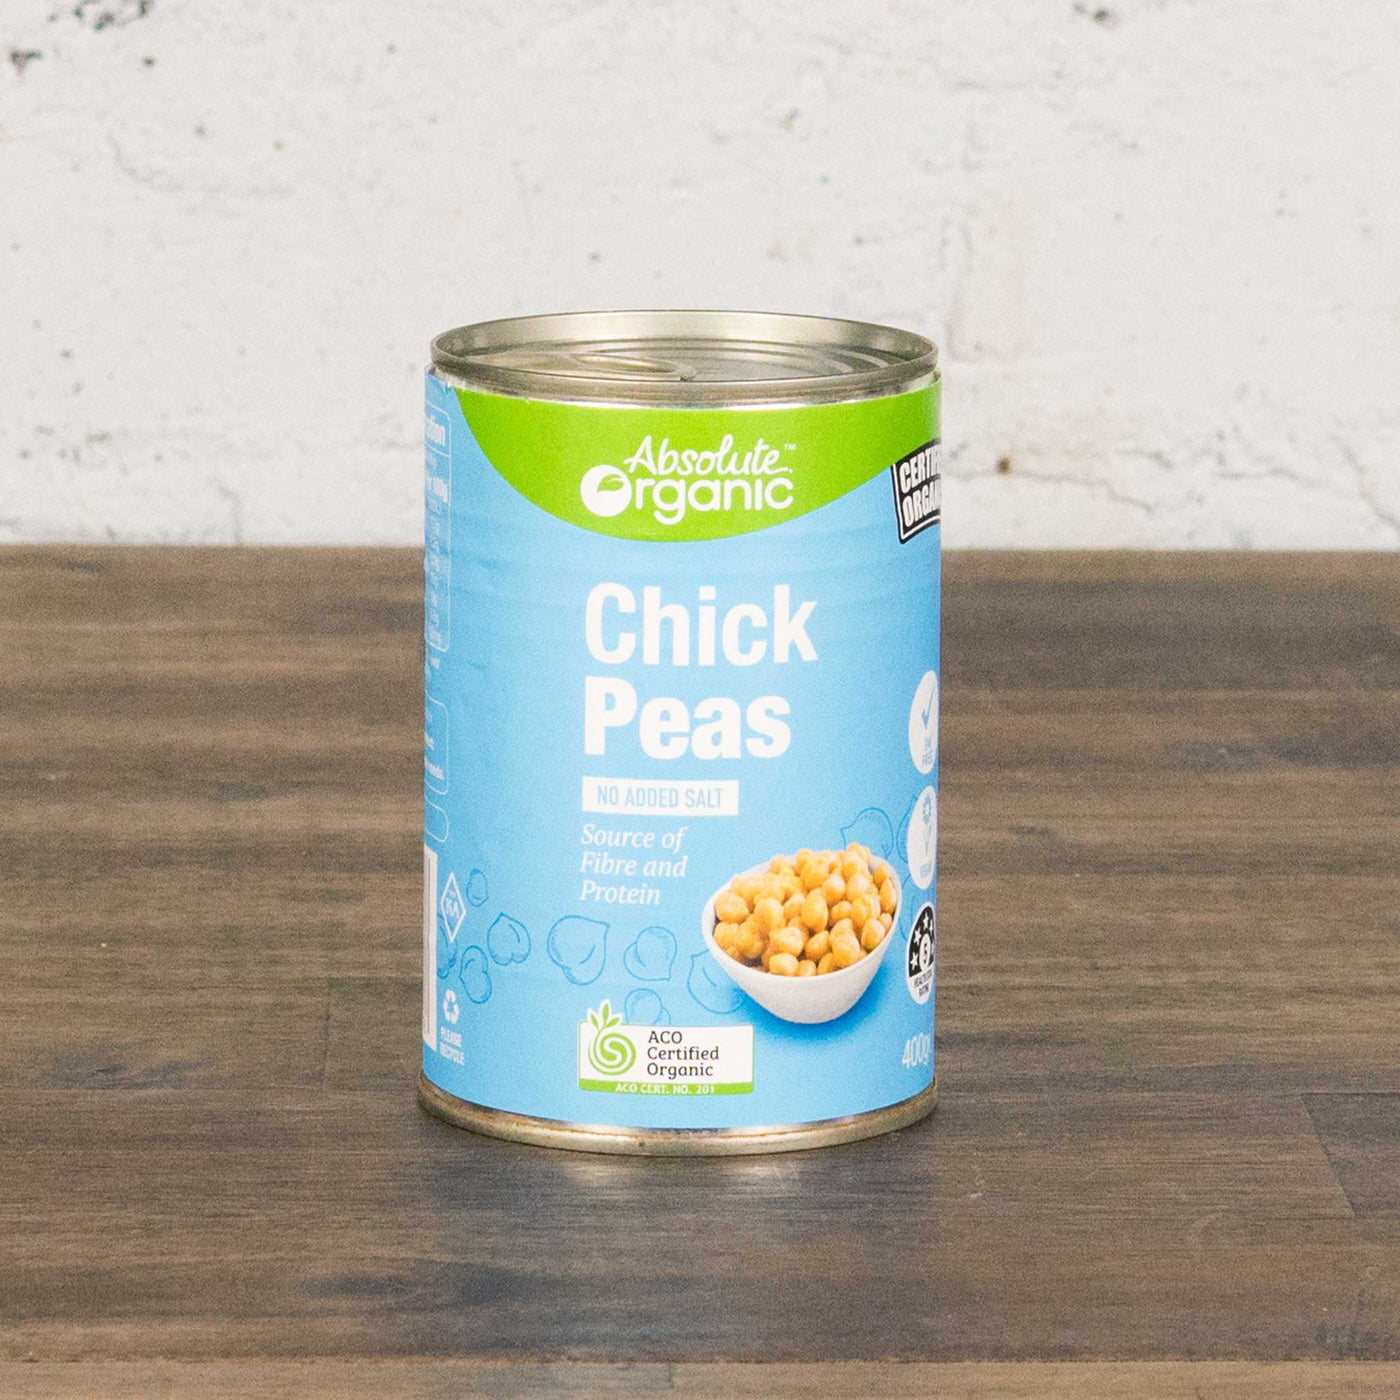 Absolute Organics Chick Peas Canned